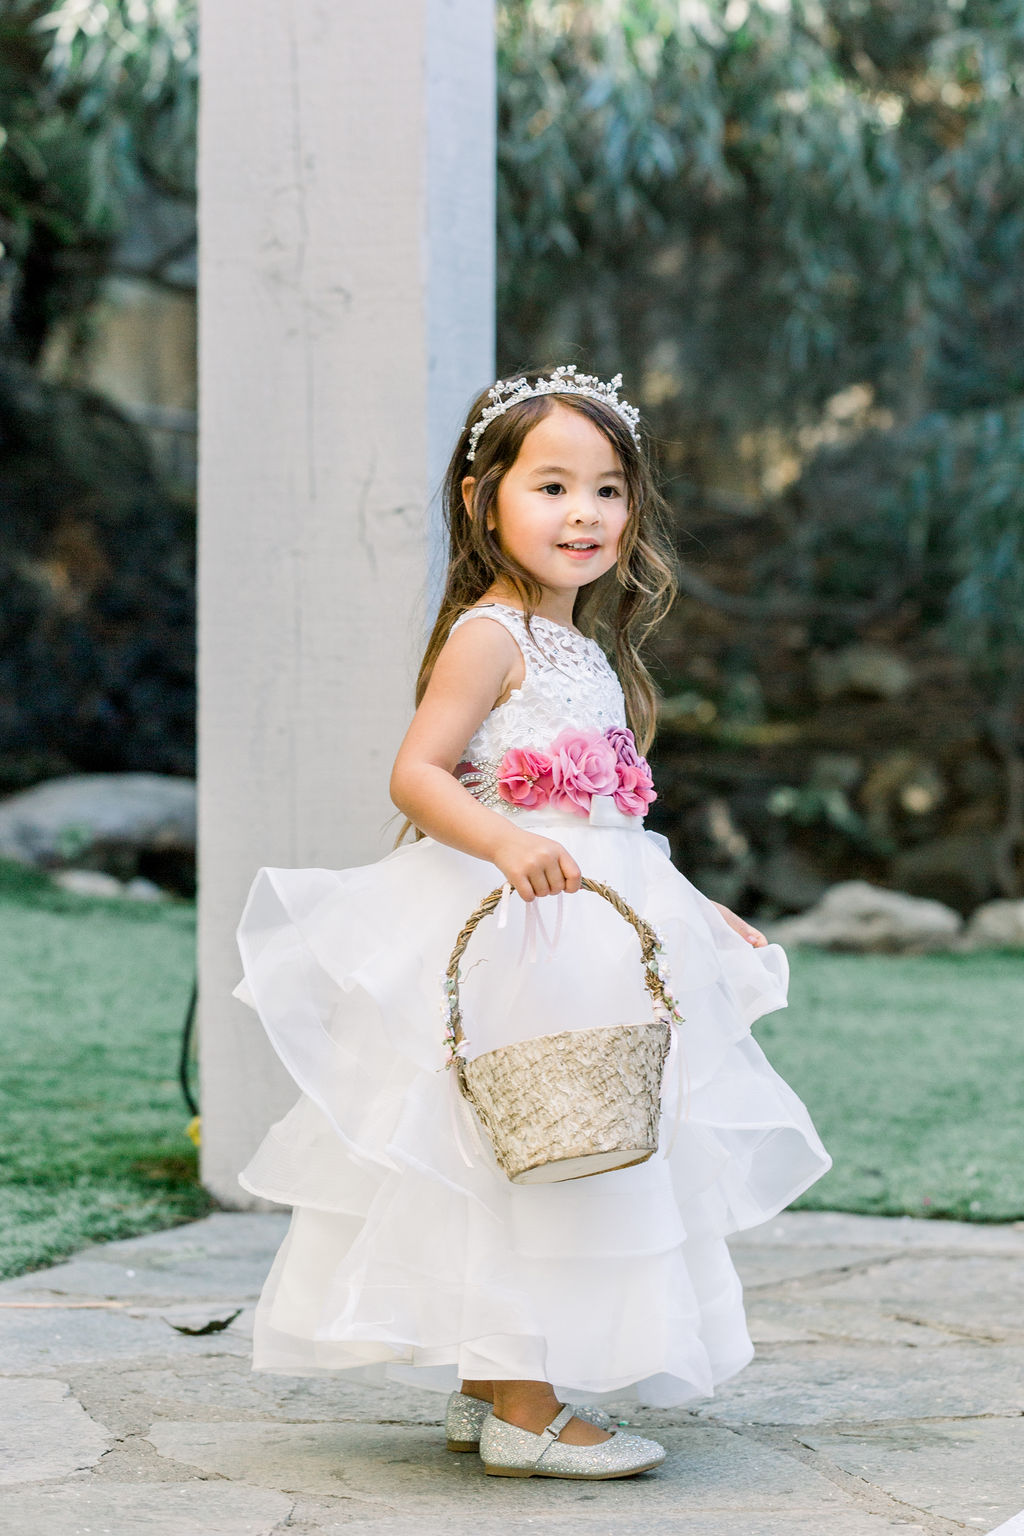 flower girl with white dress and tiara holds flower basket 